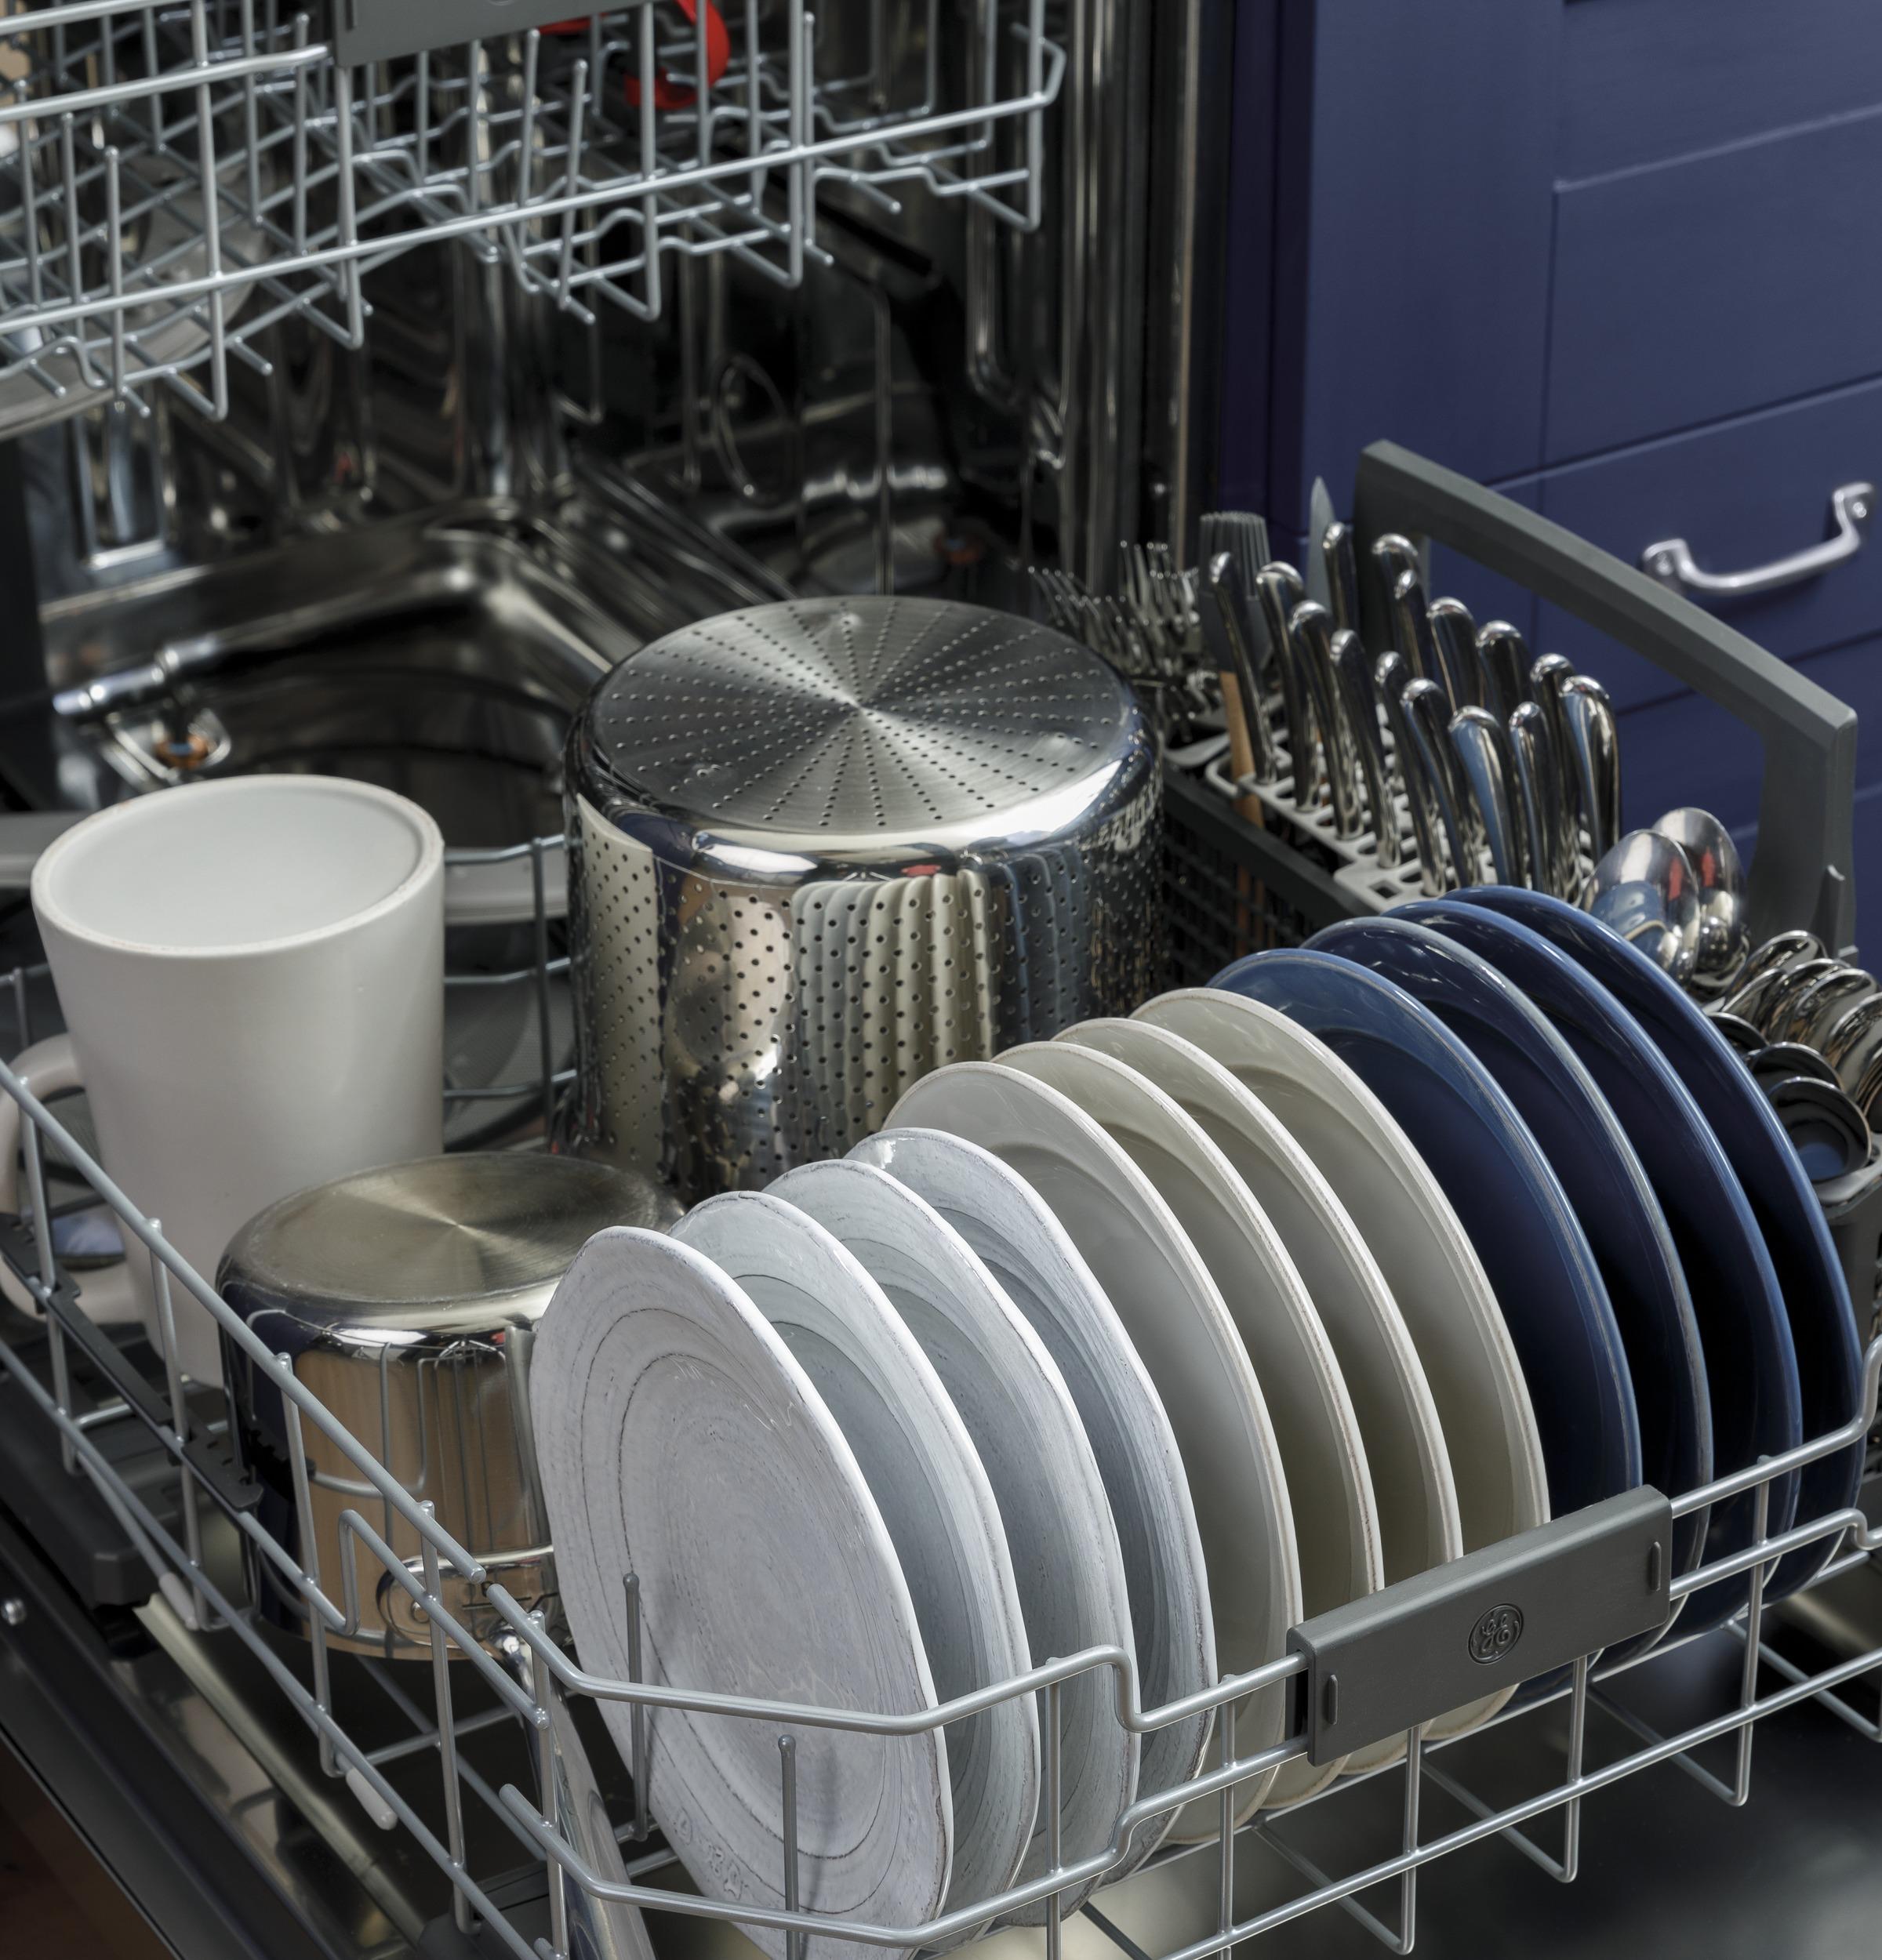 GE® Front Control with Stainless Steel Interior Dishwasher with Sanitize Cycle & Dry Boost